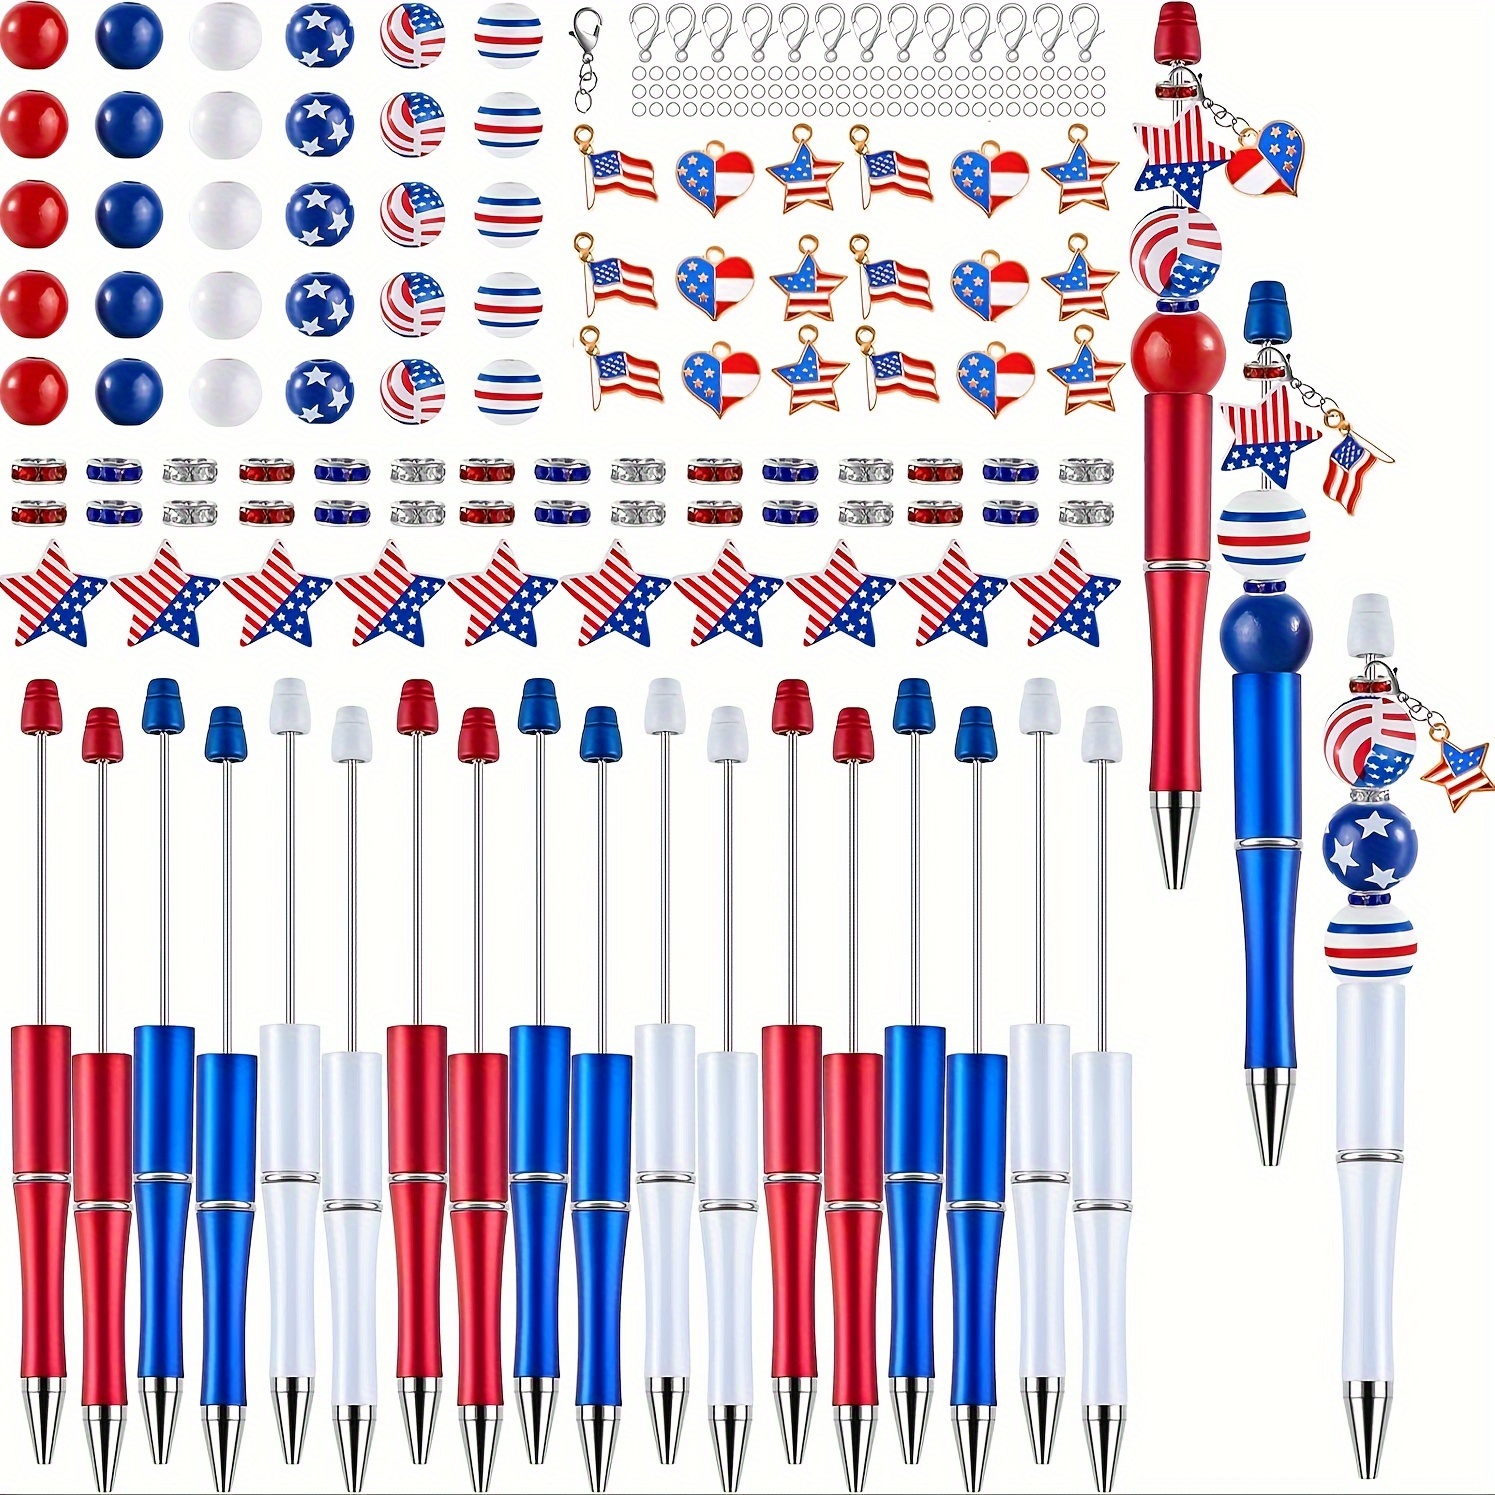 

Diy Silicone Beaded Pen Making Kit With 9pcs Bead Pens, 65pcs Blue White Red Beads, 9pcs Pendants, 10pcs Lobster Clasp And 40pcs Open Rings For Independence Day Decoration